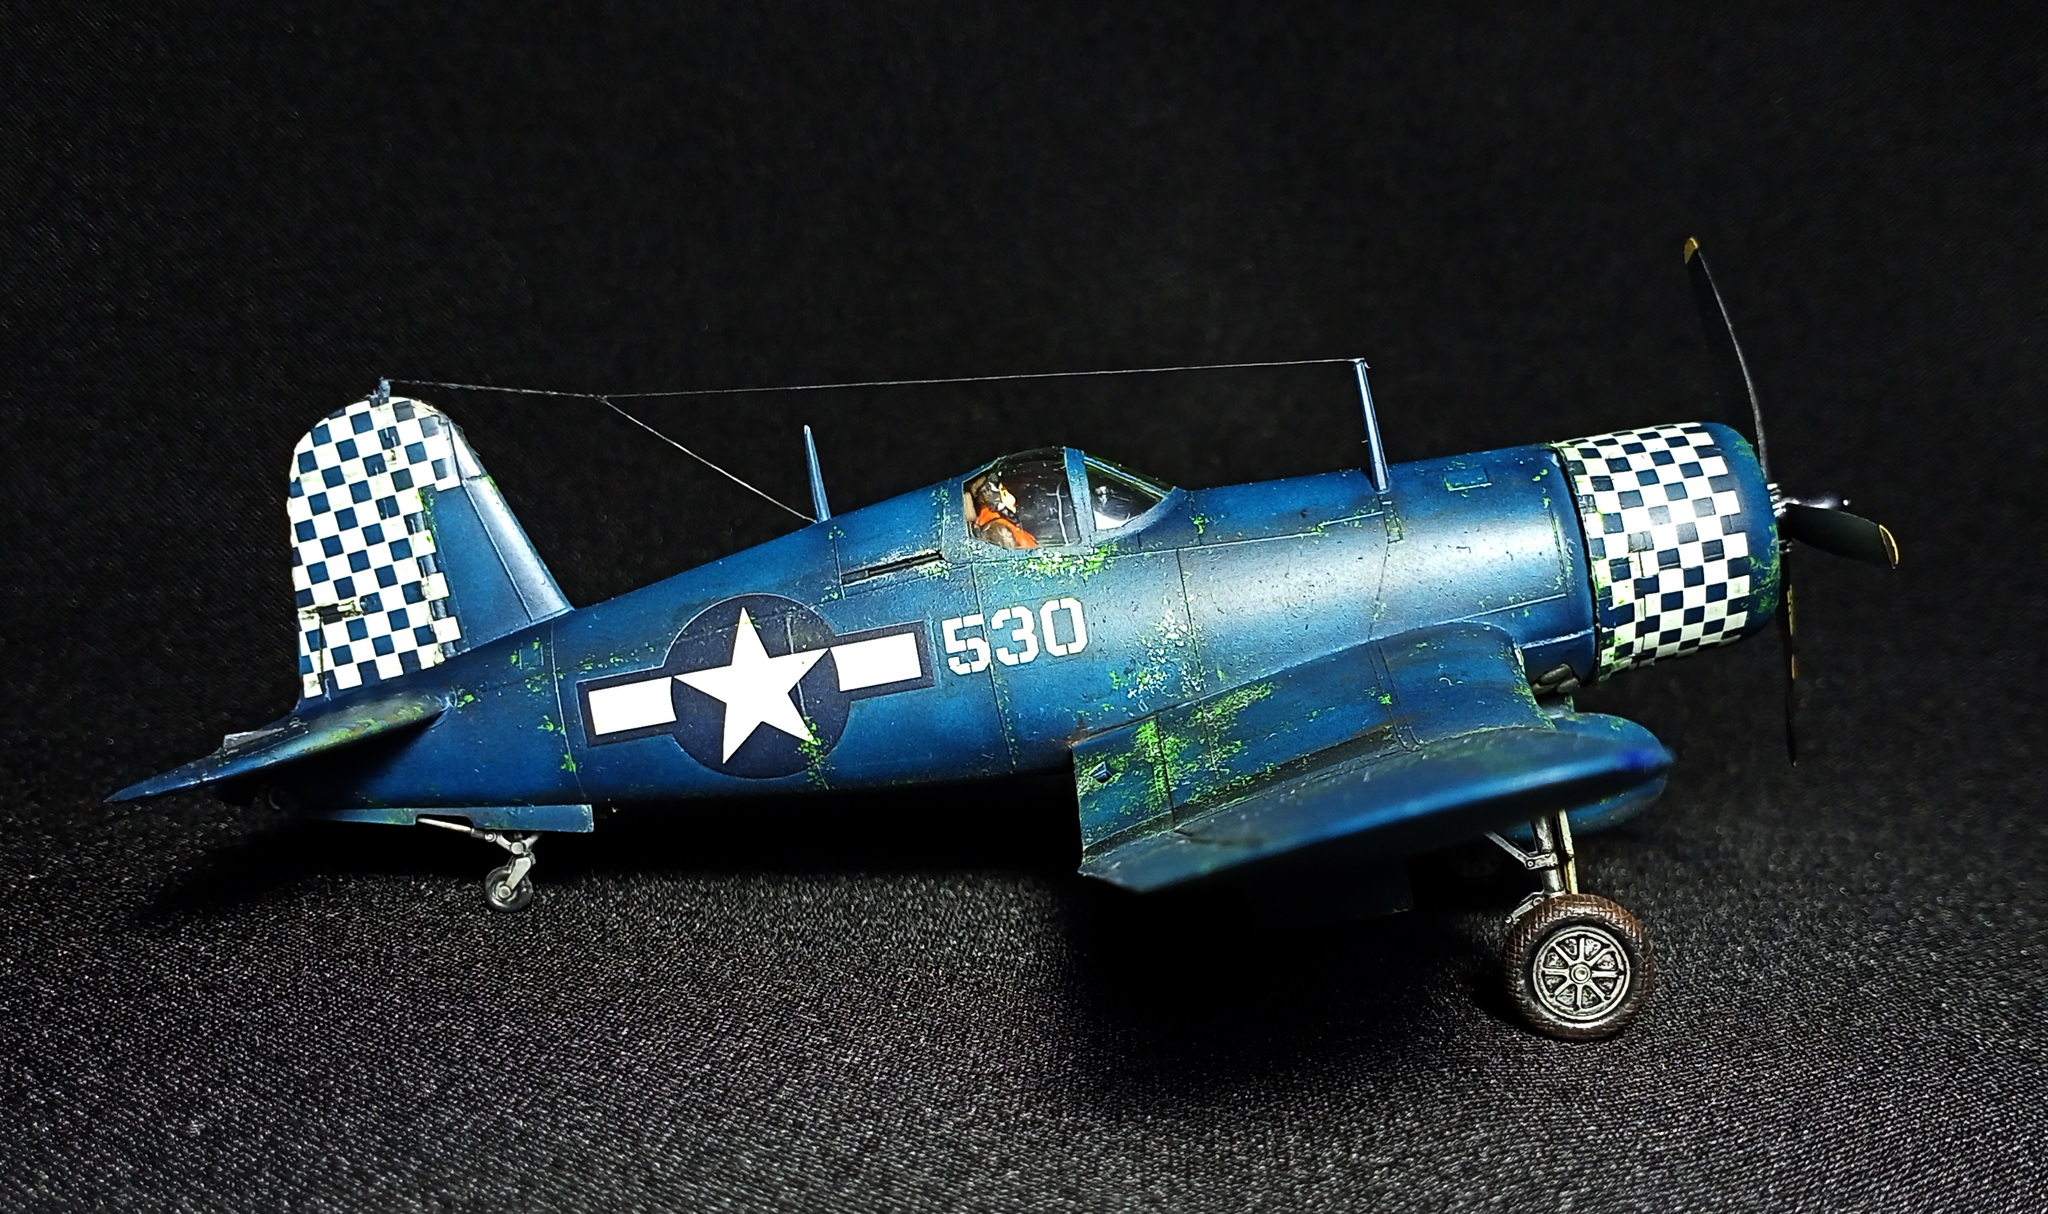 Pirate of the air ocean. - Longpost, Video, Carrier-based aviation, Fighter, USA, Collecting, Collection, Scale model, The Second World War, Airplane, Story, Aviation, Needlework without process, With your own hands, Miniature, Hobby, Aircraft modeling, Prefabricated model, Stand modeling, Modeling, My